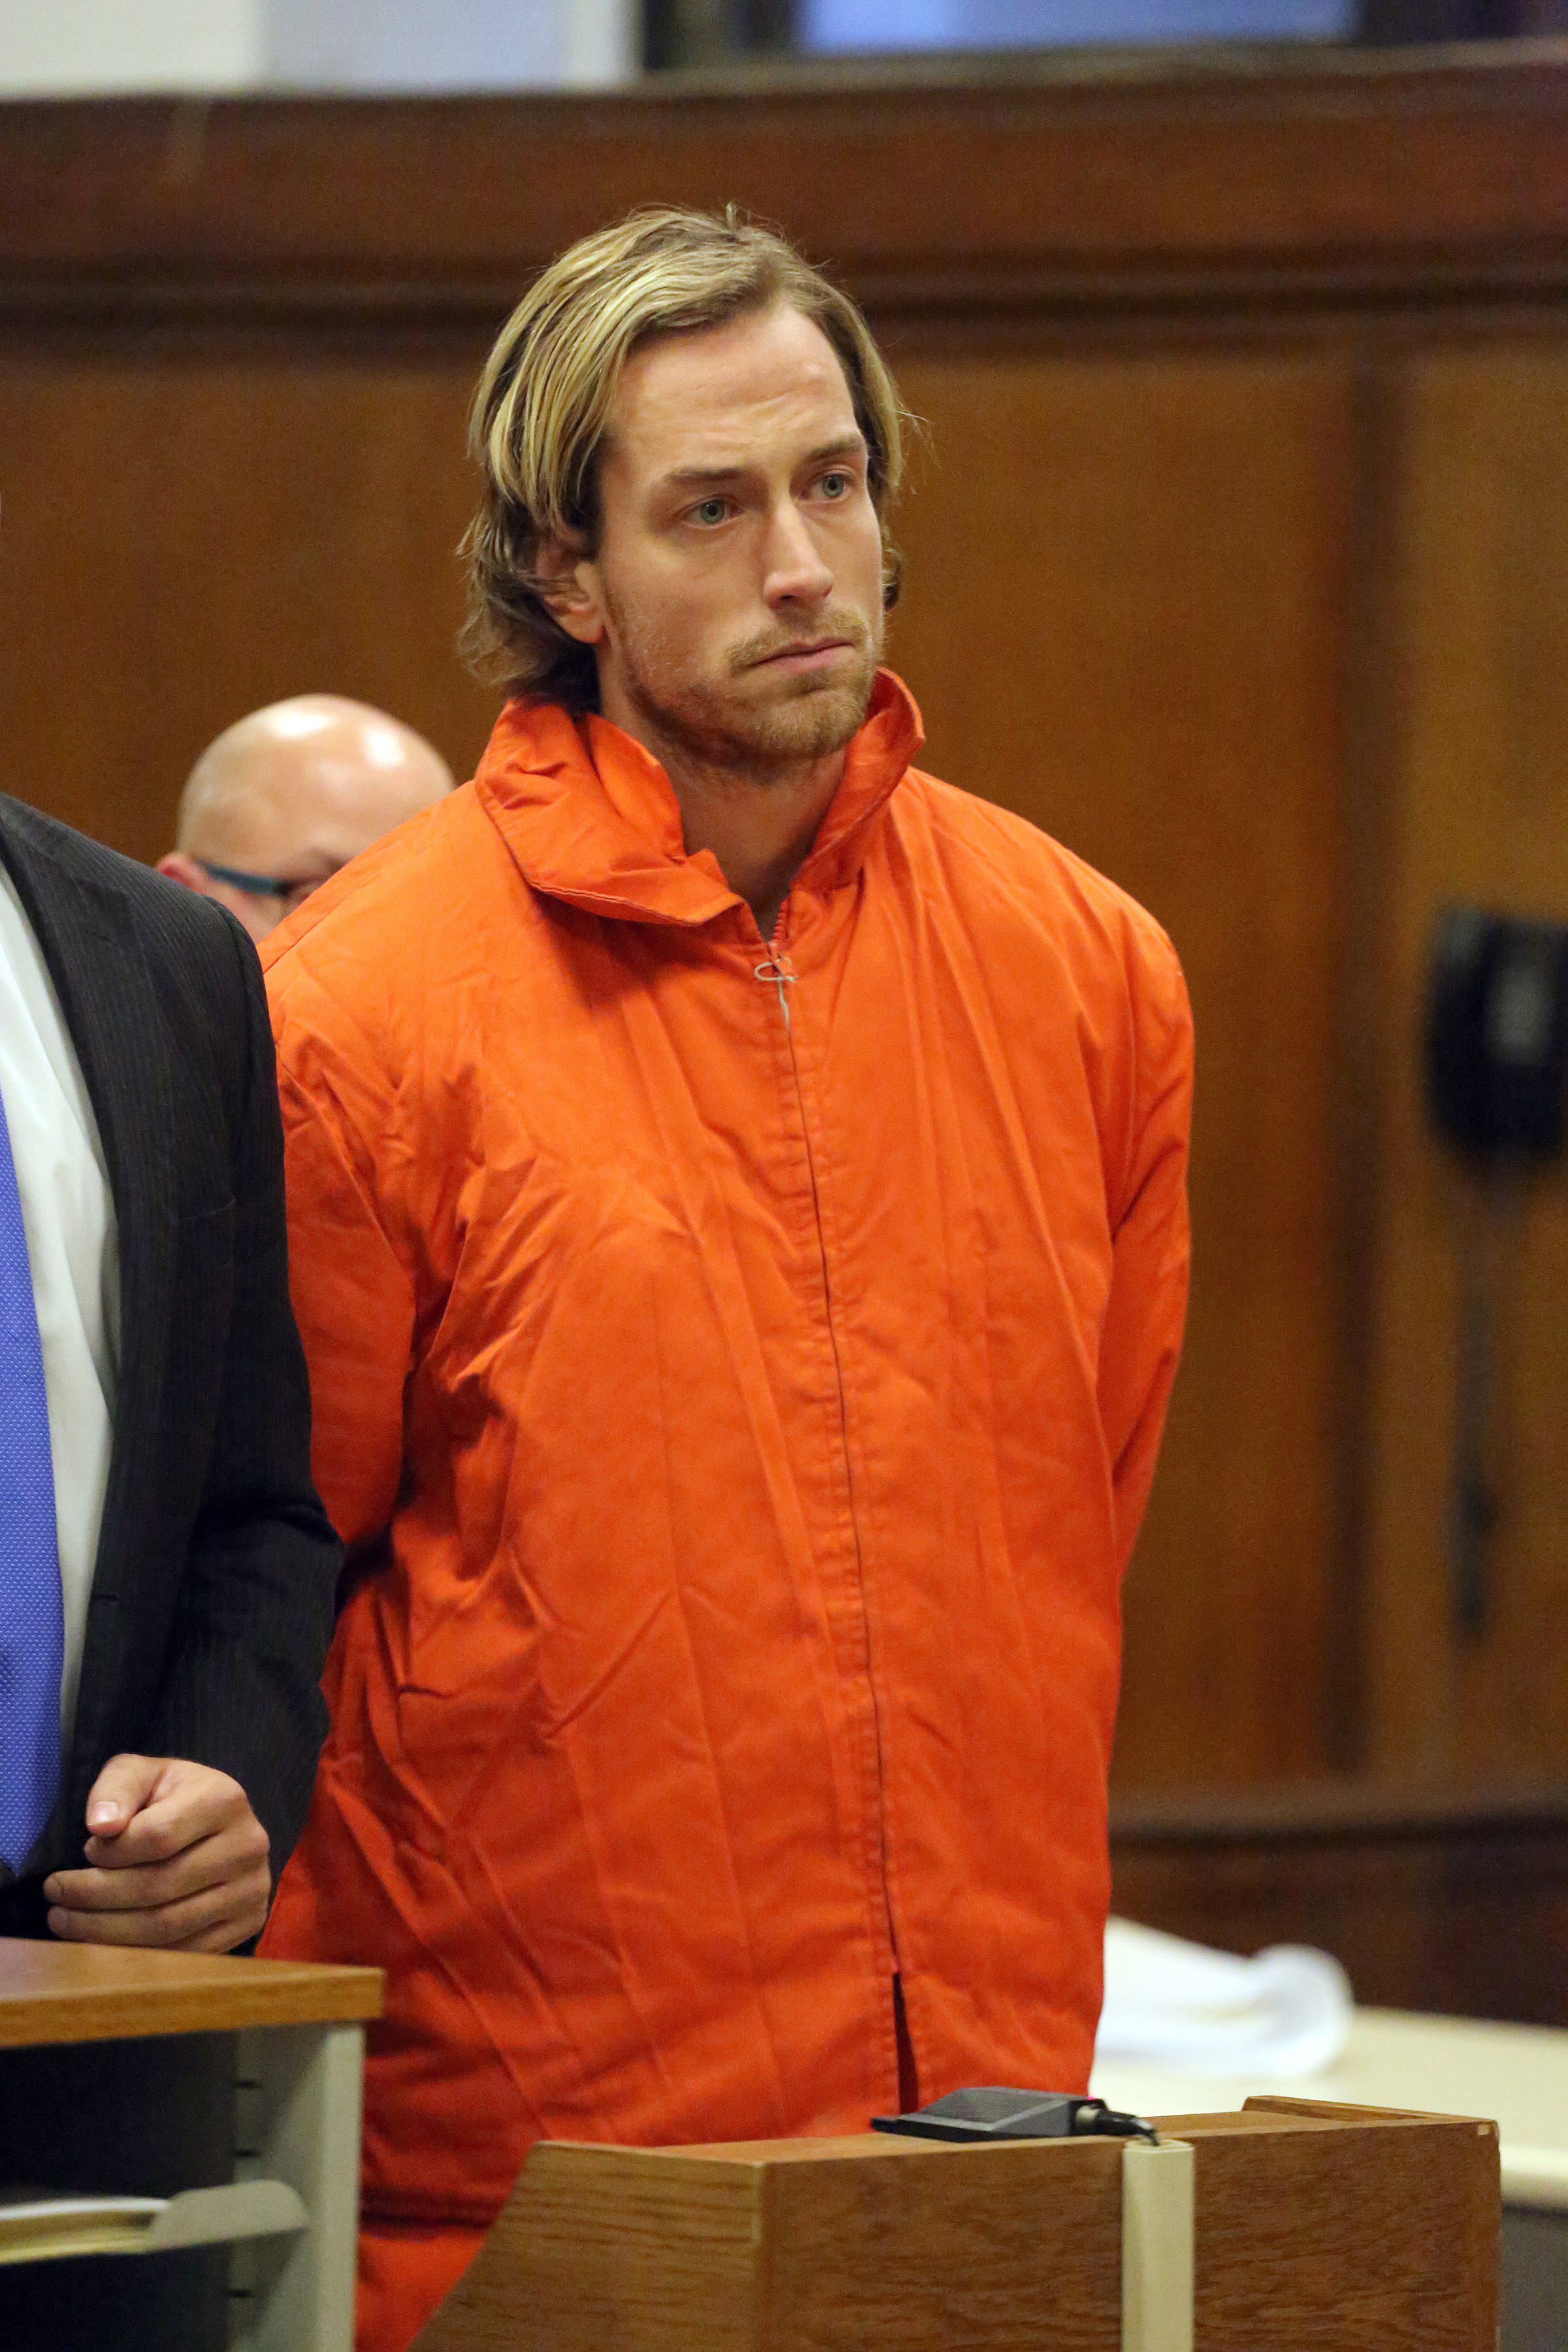 Thomas Gilbert, Jr. appeared in Manhattan Criminal Court on Friday, January 9, 2015. (New York Daily News—Getty Images)